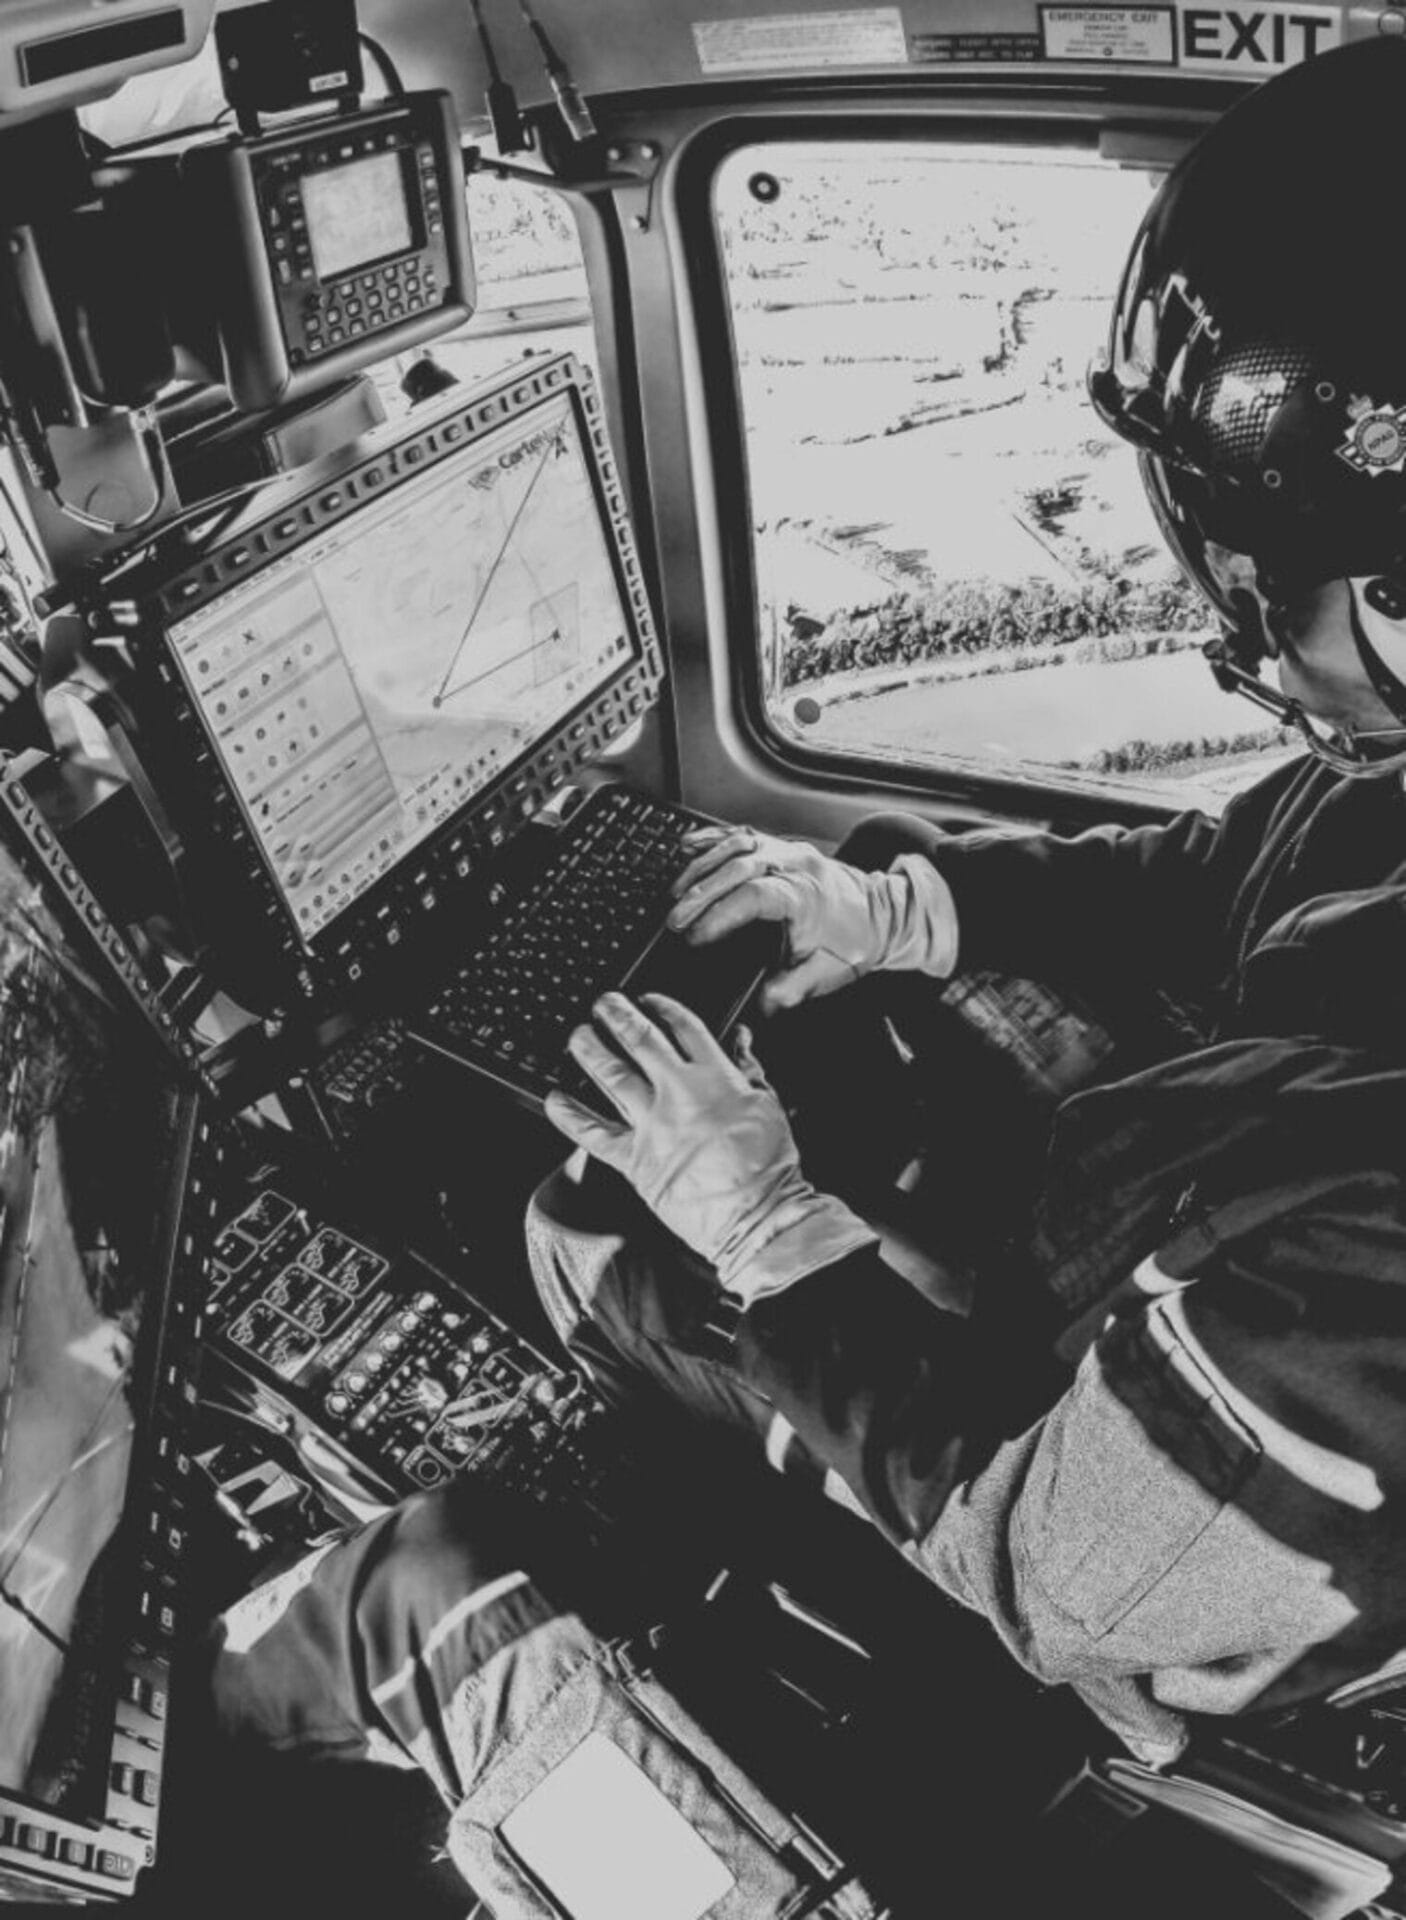 Photograph of operator and console